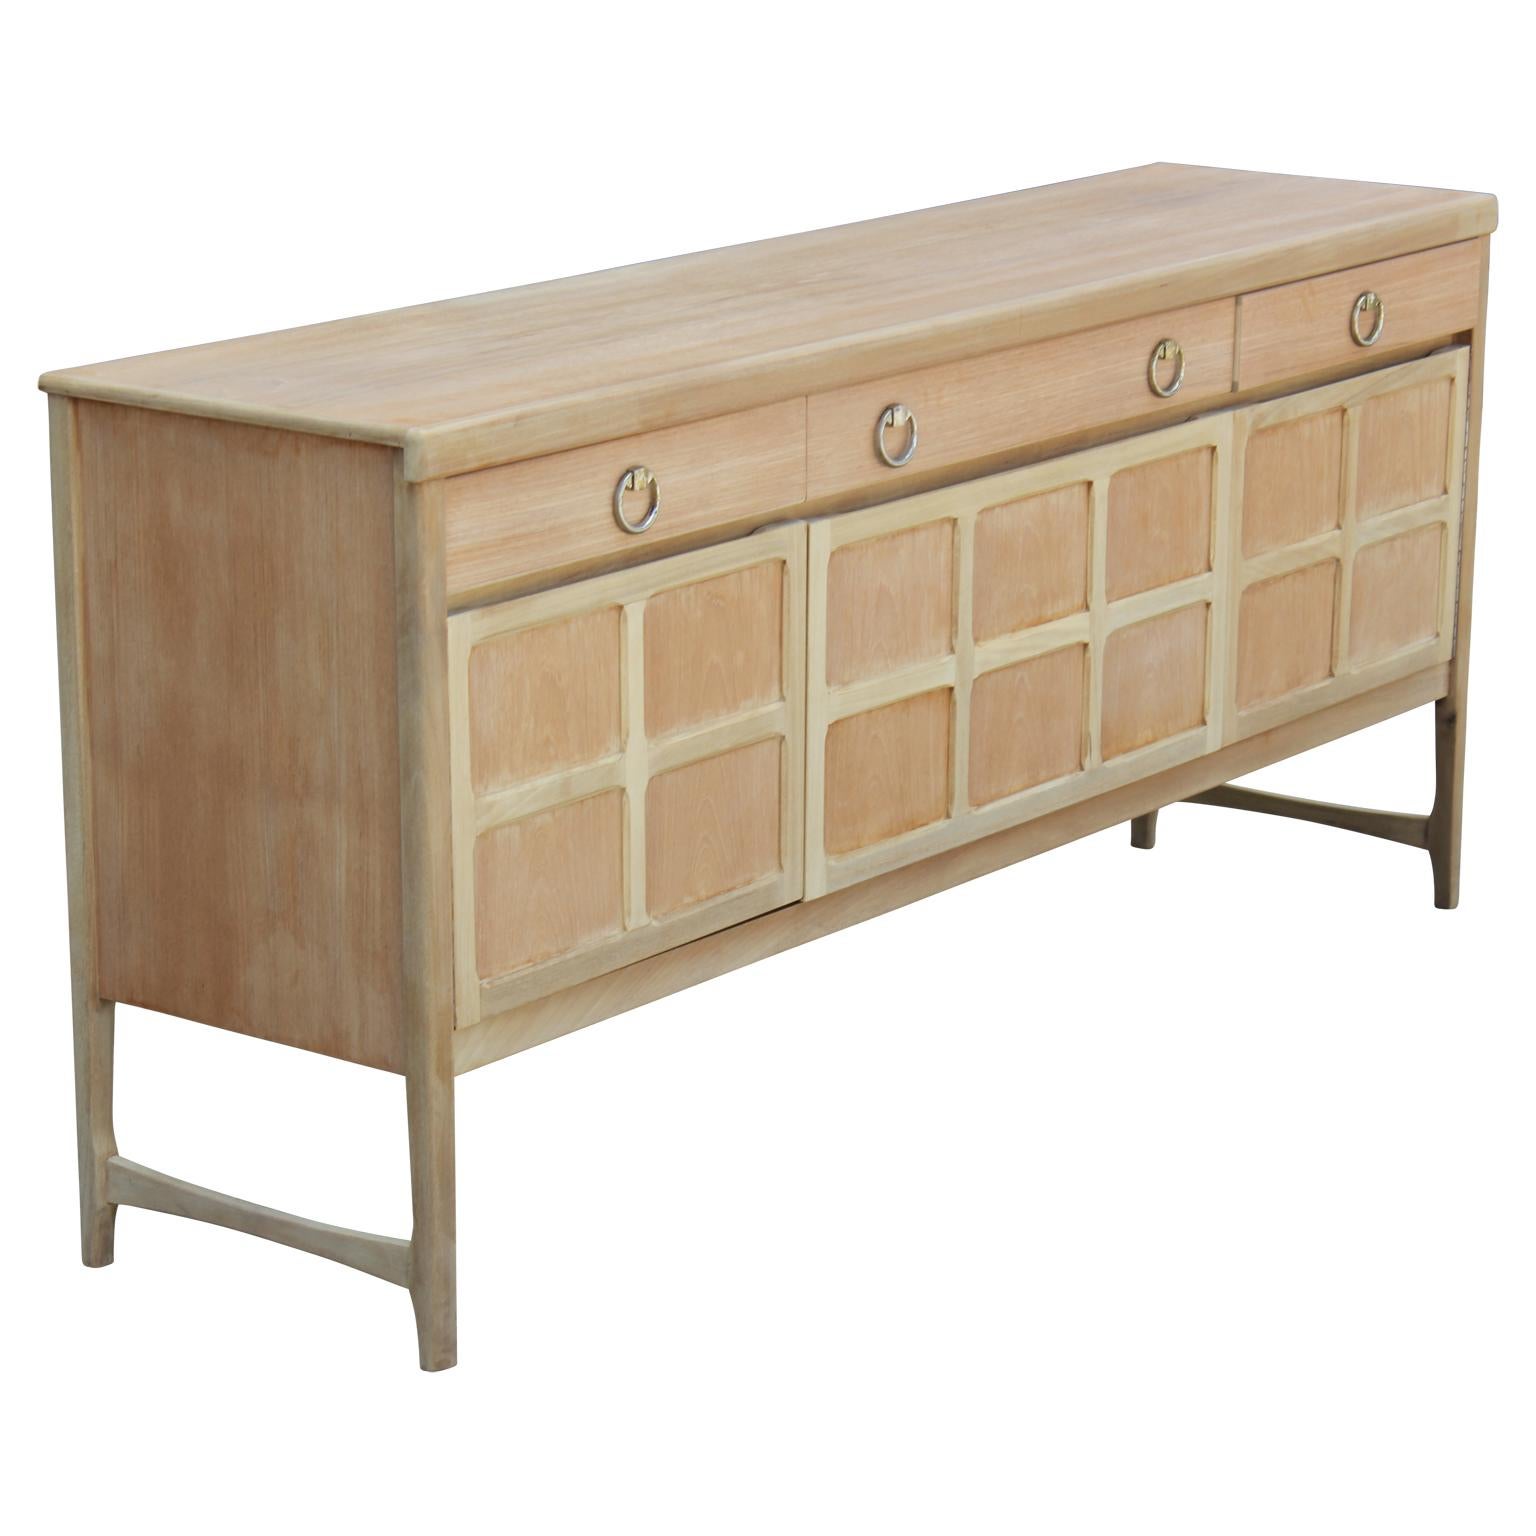 Mid-20th Century Modern Hollywood Regency Bleached Sideboard with Brass Ring Handles